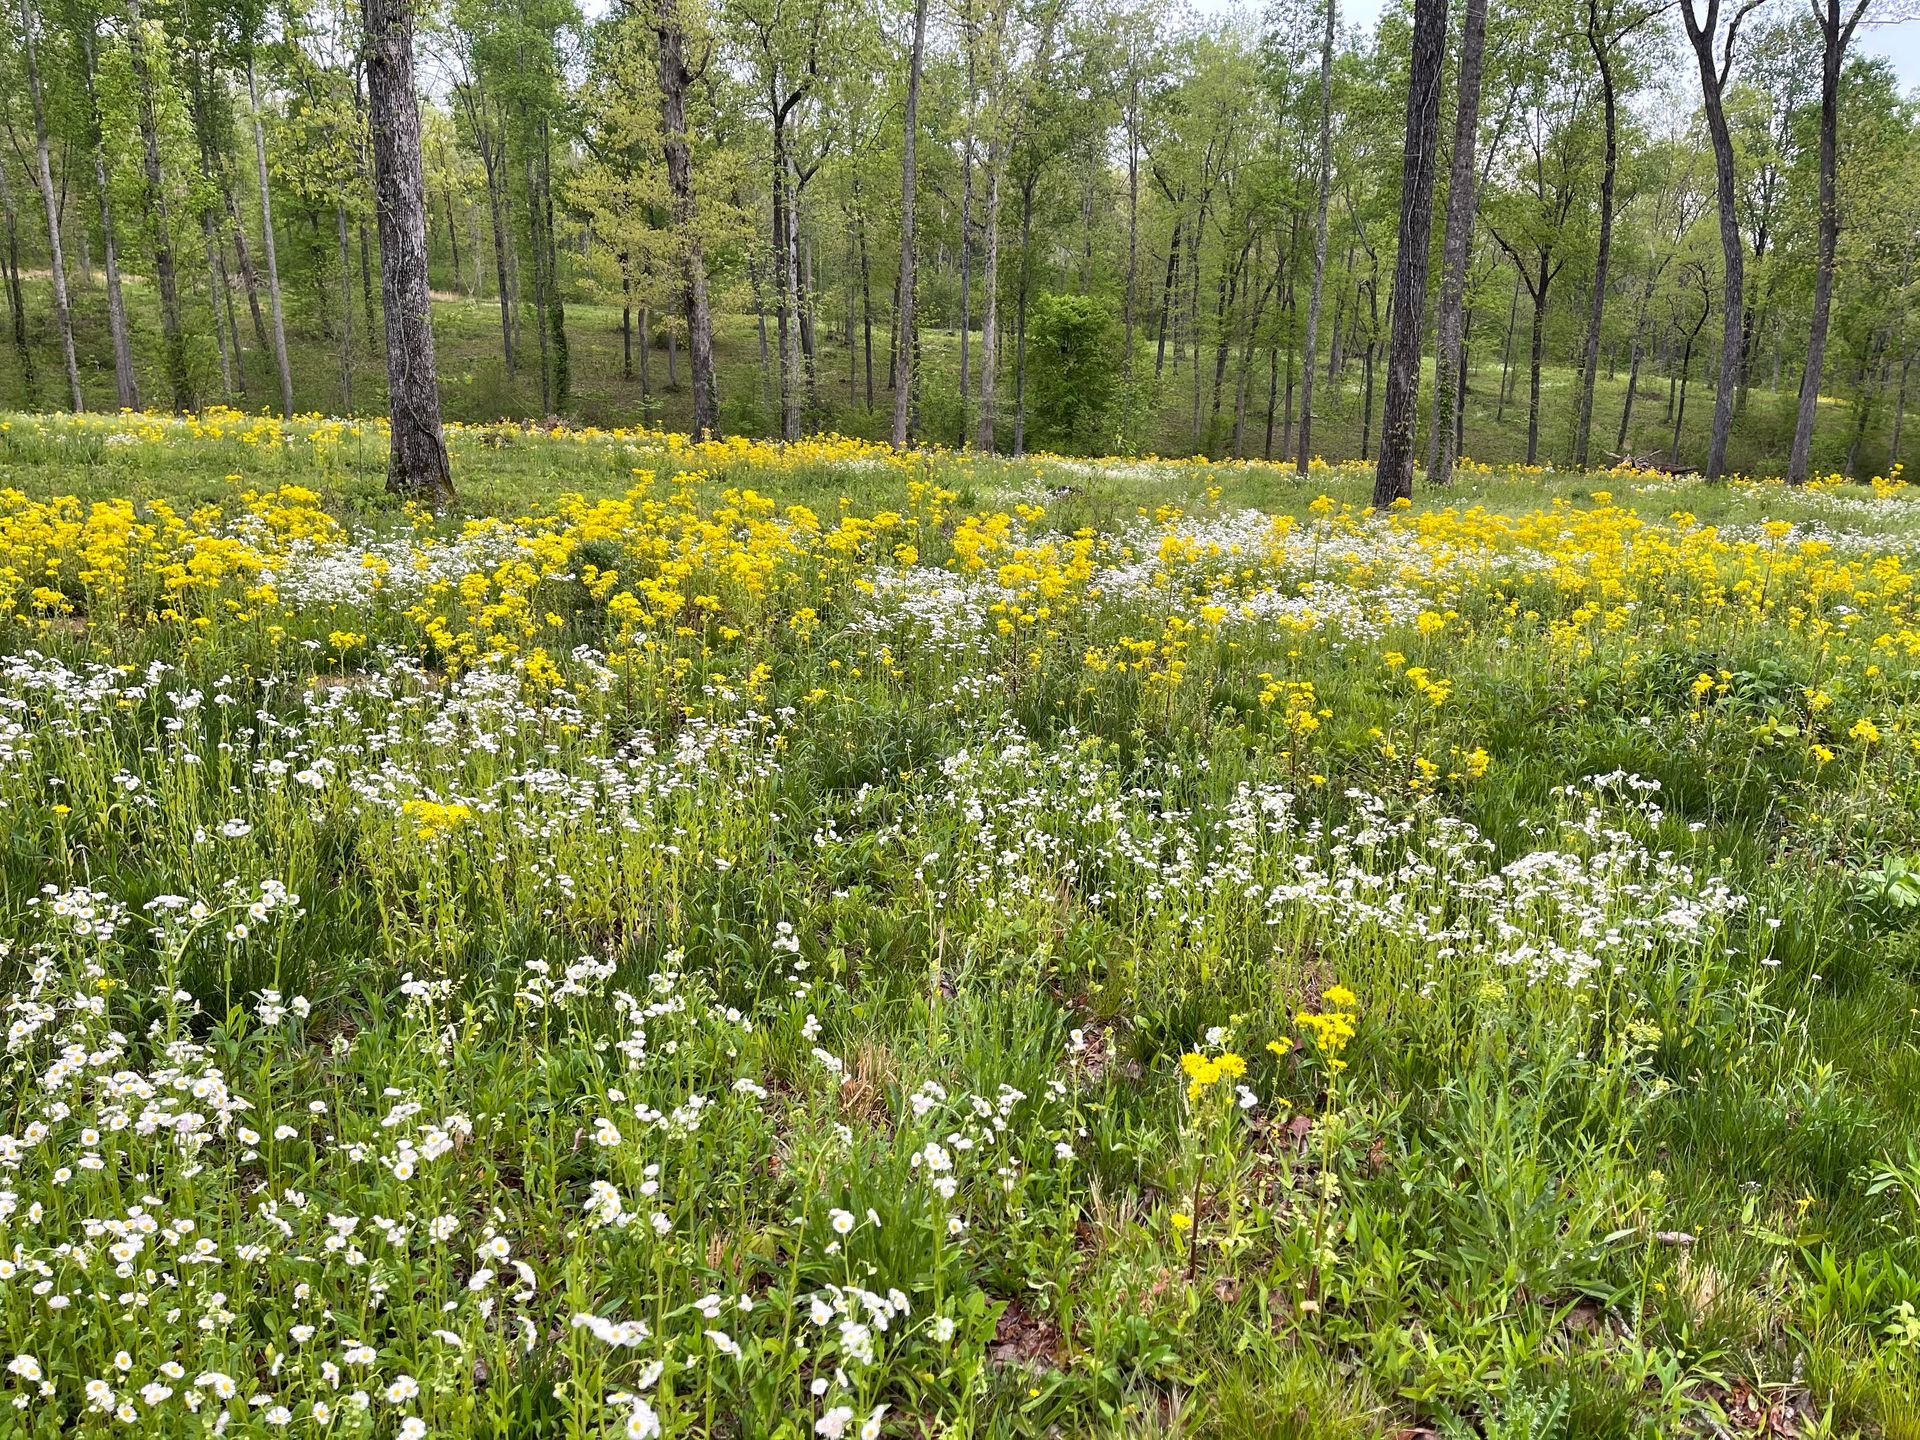 A field of yellow and white flowers in the middle of a forest.